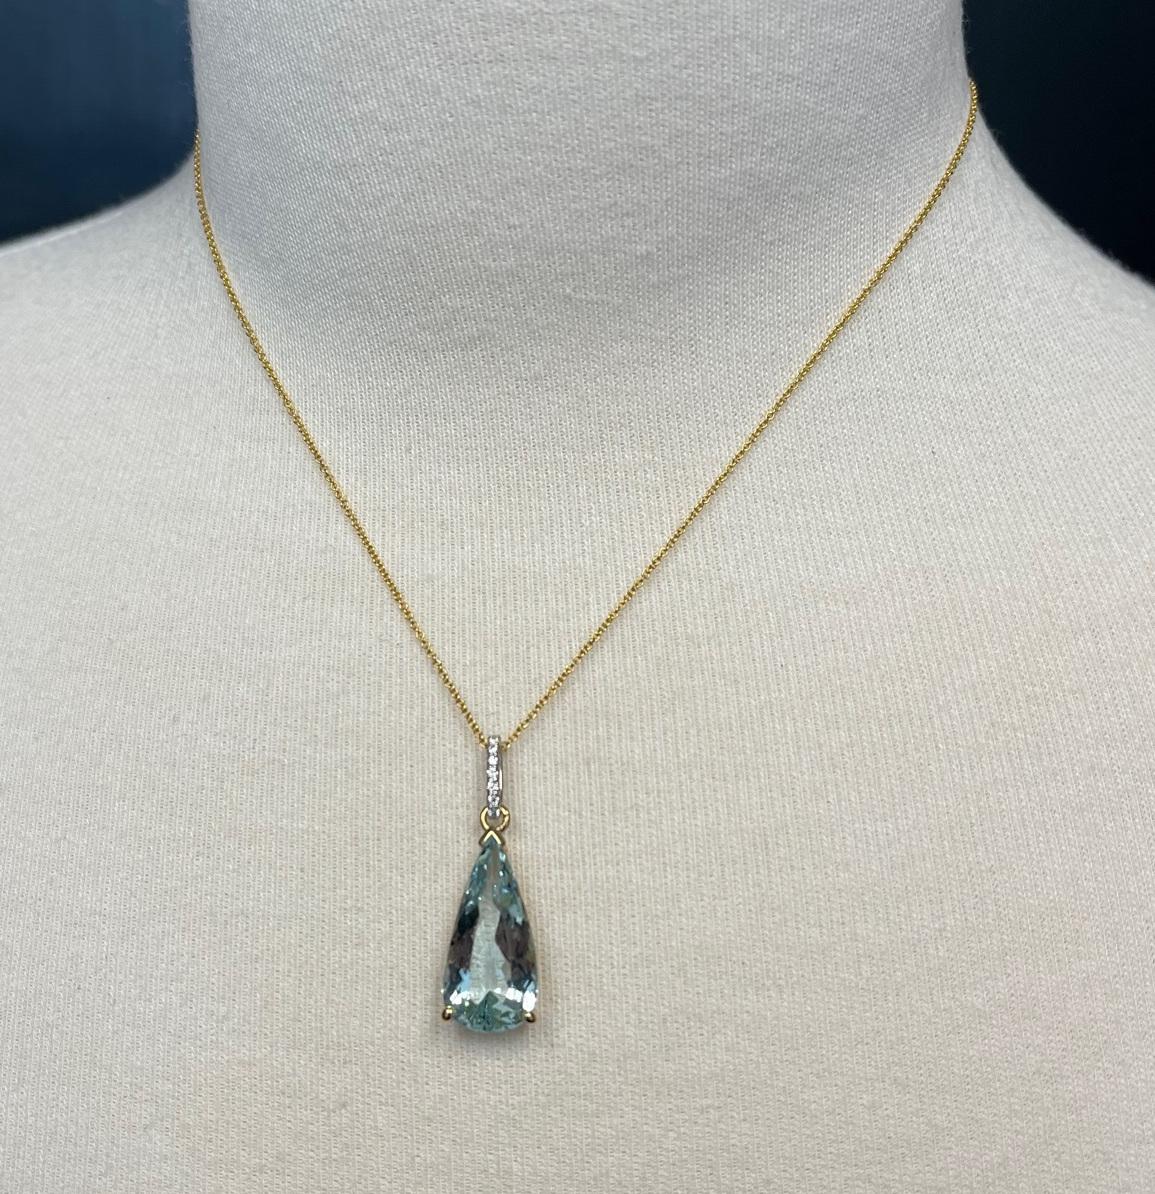  7.07 Carat Aquamarine and Diamond Pendant in White and Yellow Gold In New Condition For Sale In Los Angeles, CA